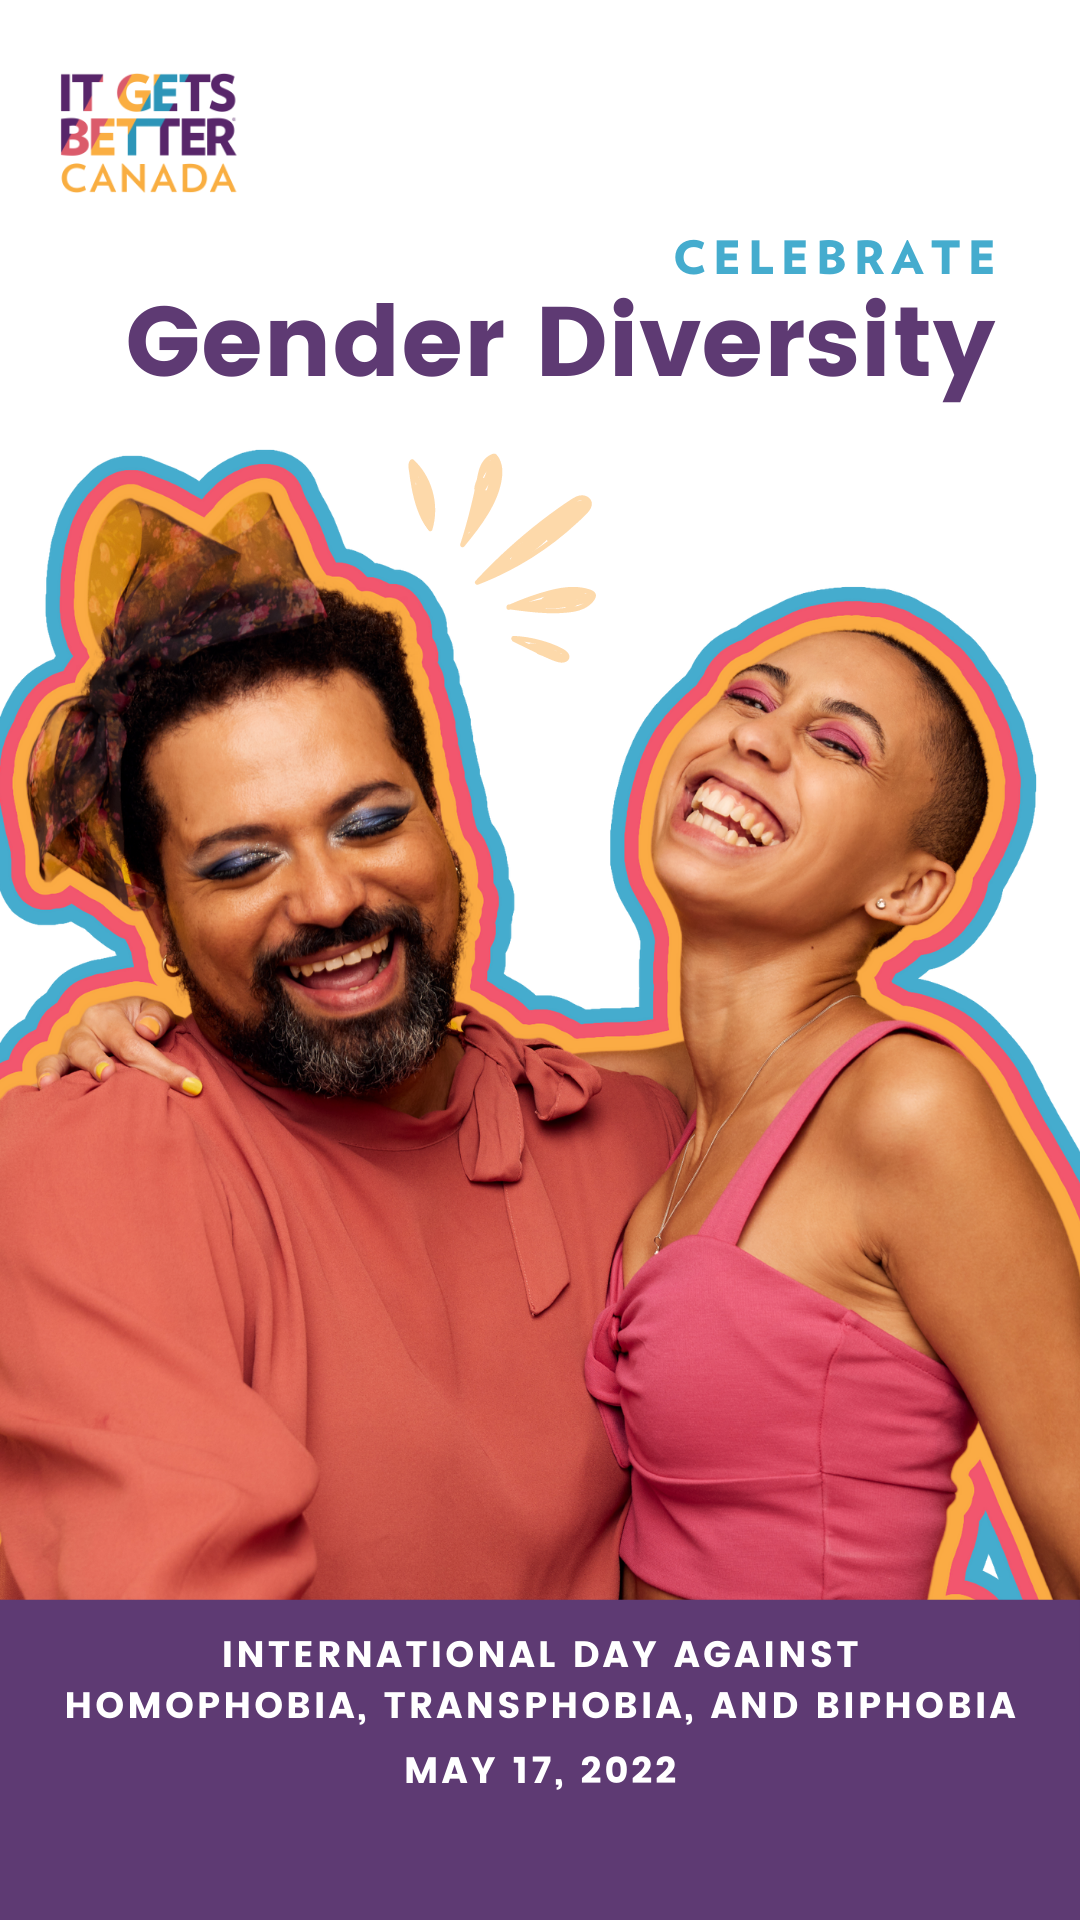 It Gets Better Canada logo with two gender diverse people embracing and laughing. Text: Celebrate Gender Diversity. International Day Against Homophobia, Transphobia, and Biphobia May 17, 2022